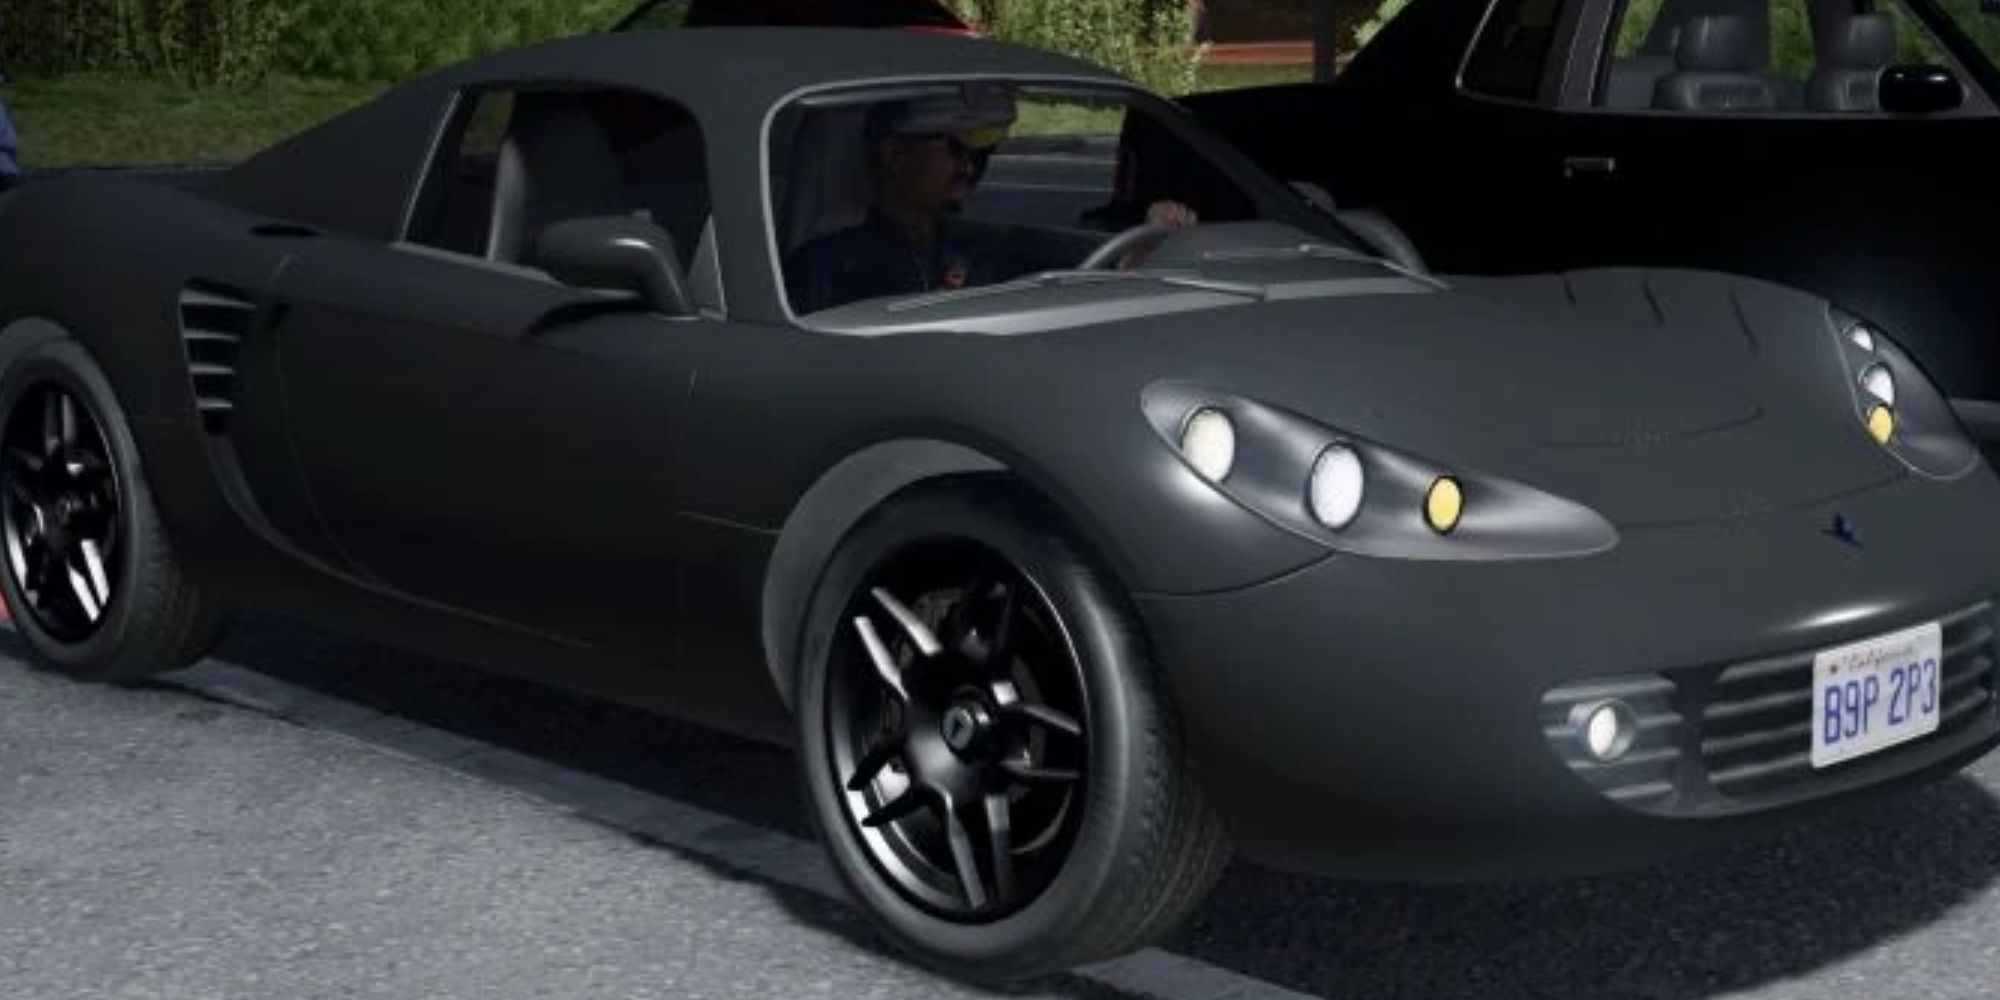 A black Sunrim-EV from Watch Dogs 2 being driven